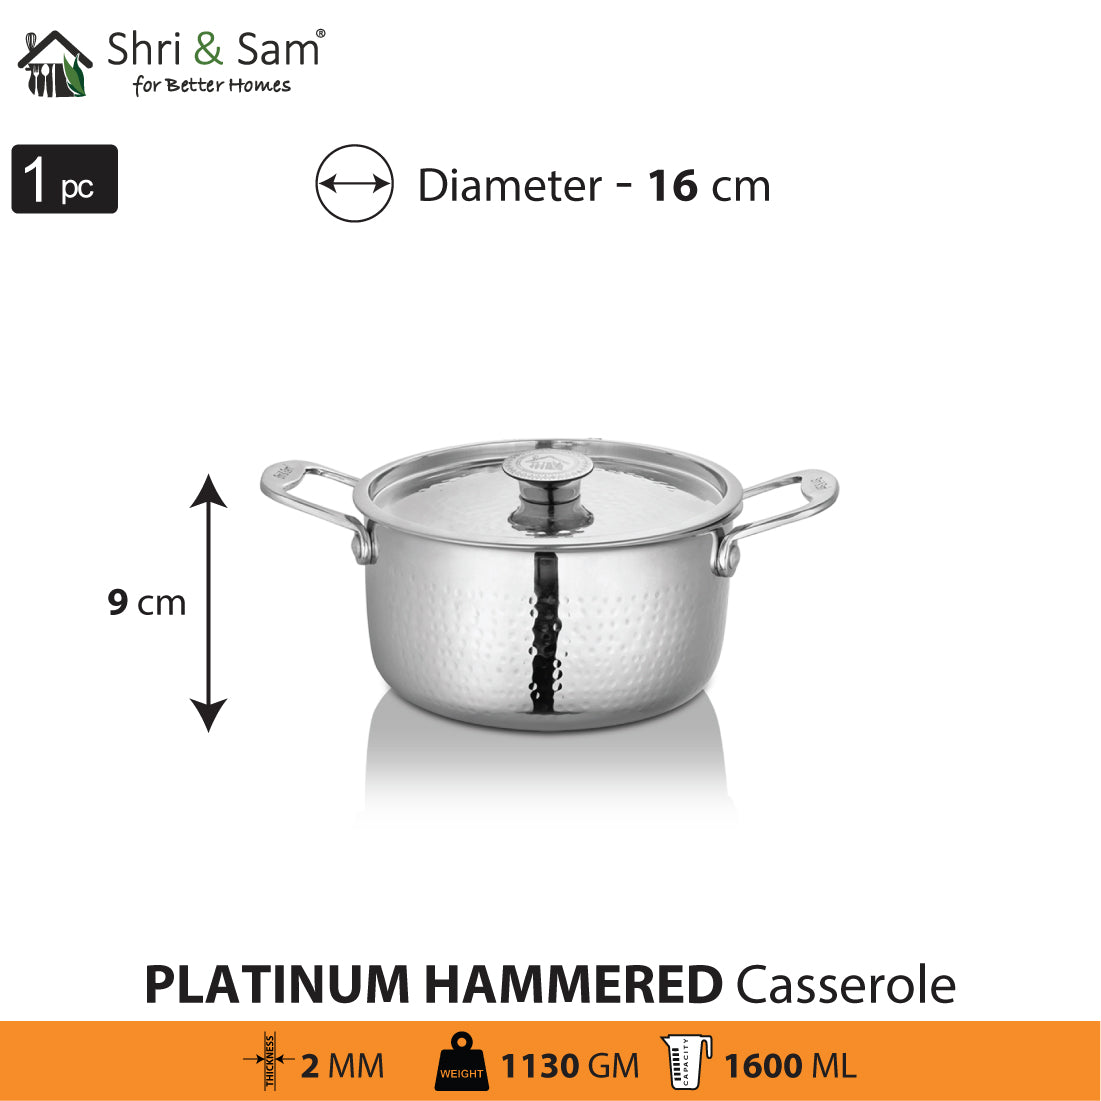 Stainless Steel Heavy Weight Hammered Casserole with SS Lid Platinum